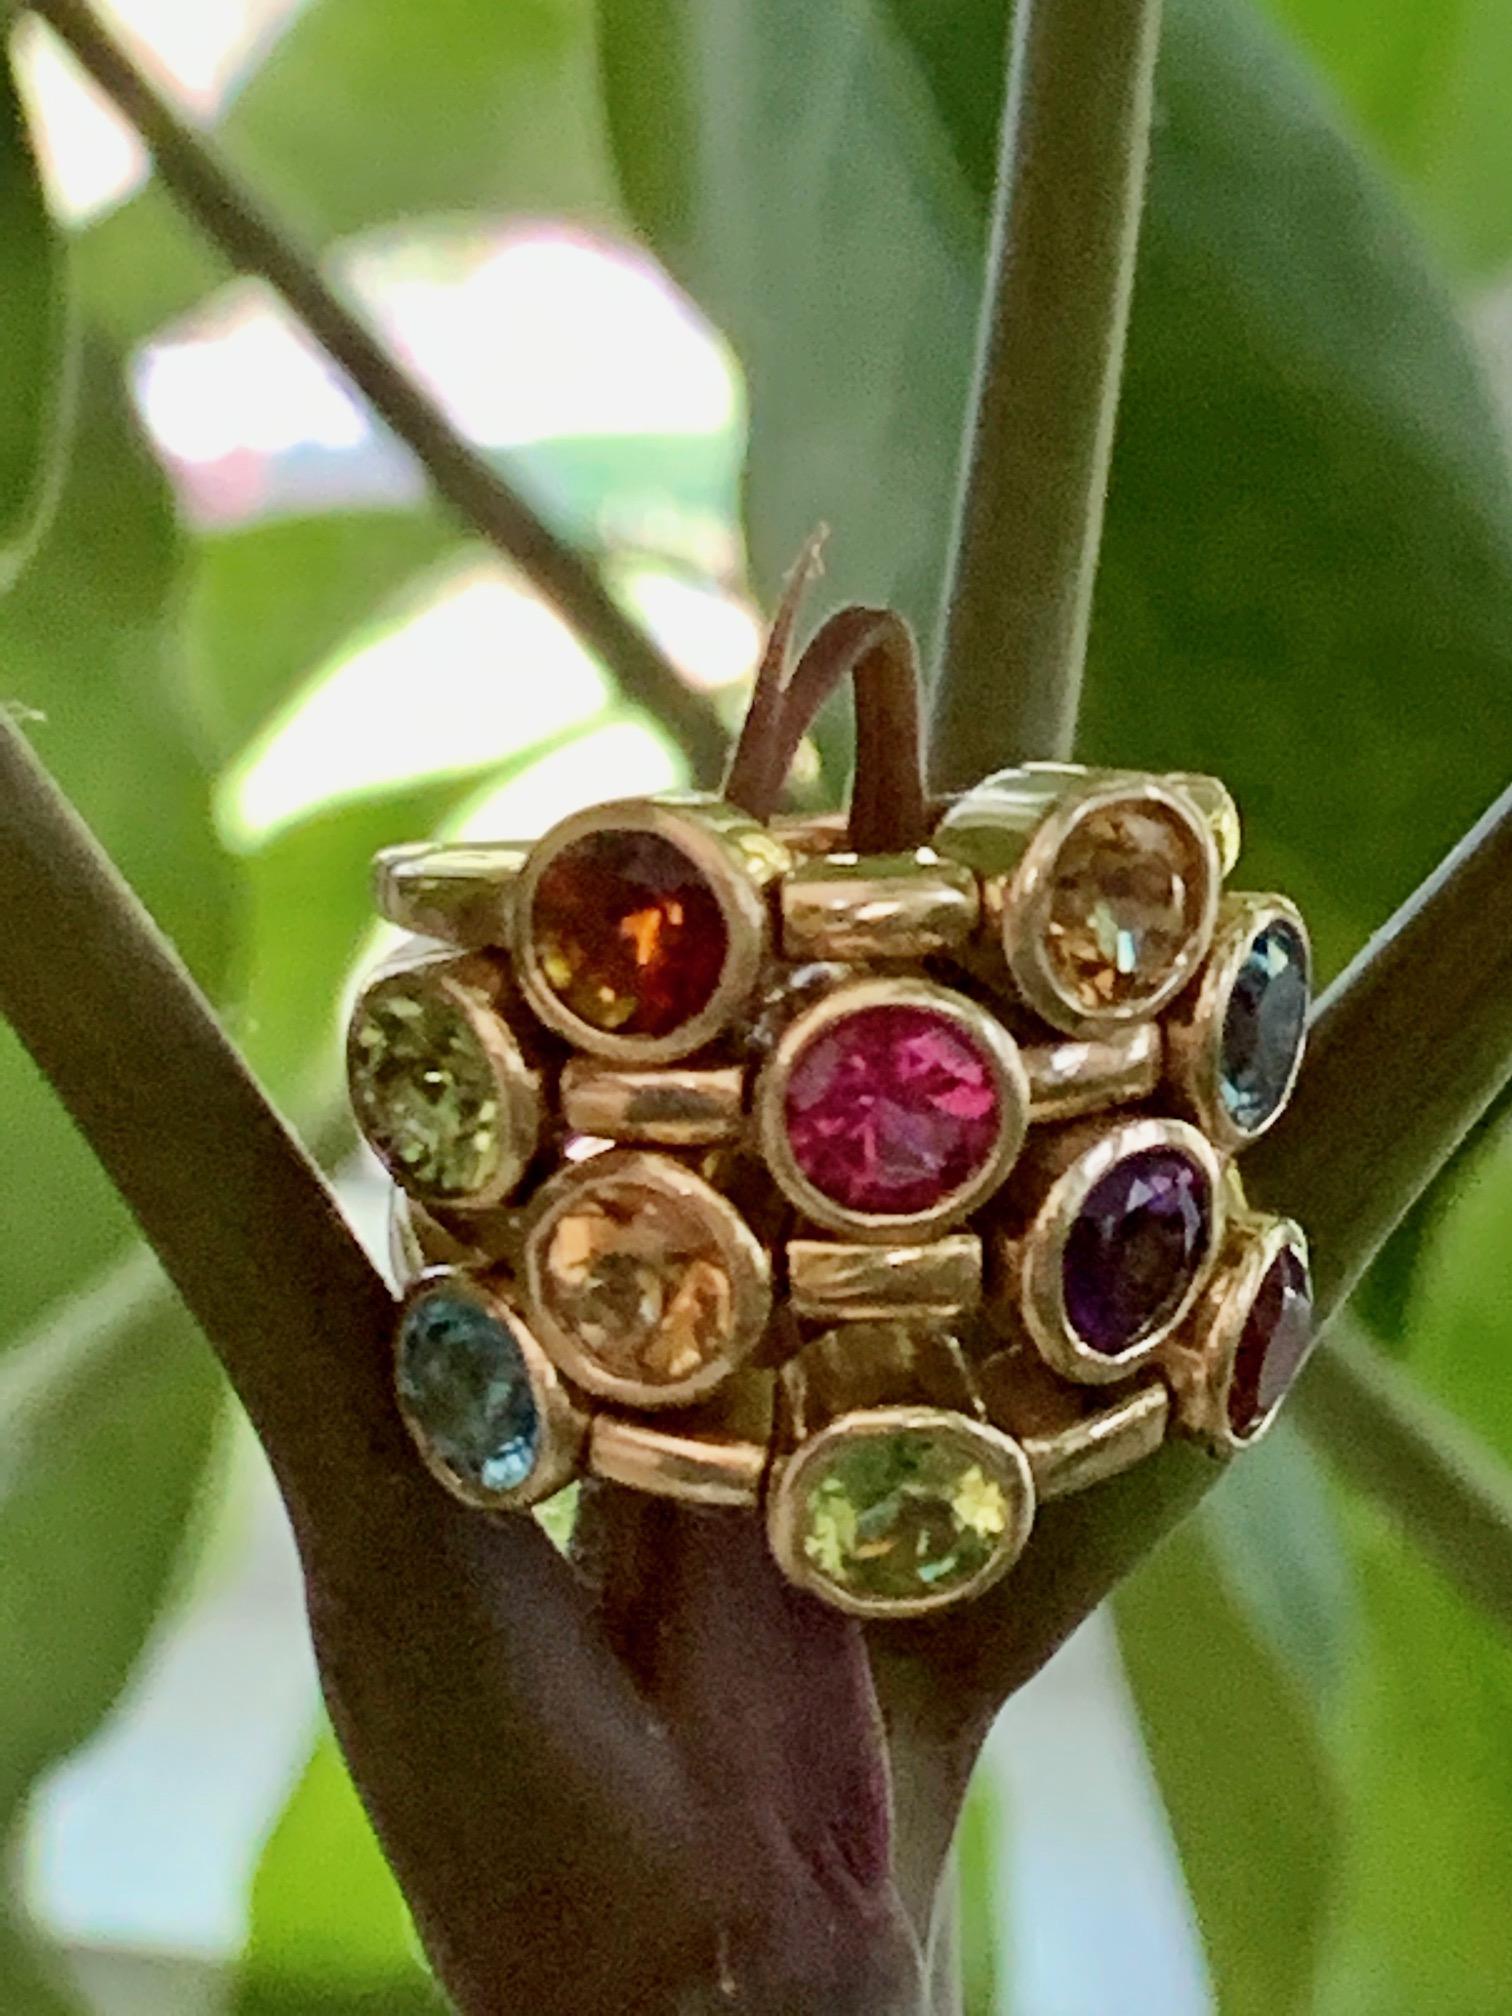 This is a modern, designer, 14 Kart yellow gold ring designed by Sonia B.  

The ring features:
10 round faceted colored gem stones = 5mm each
Includes: Peridot, Blue Topaz, Pink Tourmaline, Citrine and Amethyst
Each row of stones, moves up and